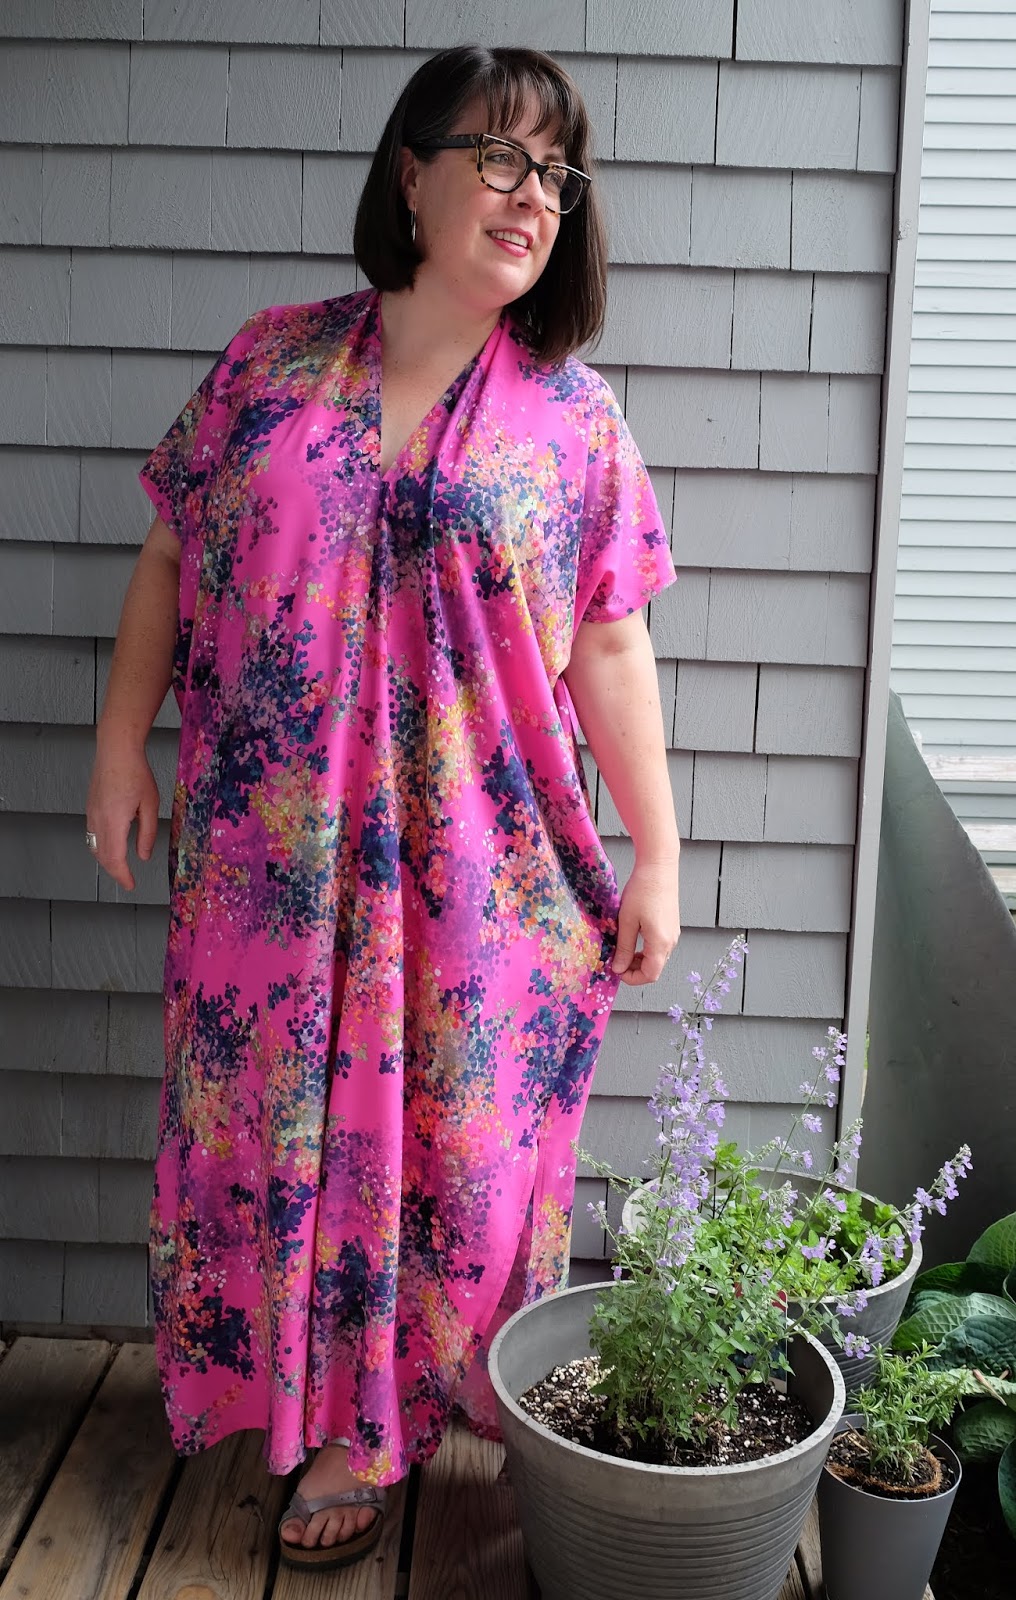 Cookin' & Craftin': Caftans and Cocktails: Cris Wood Sews Envelope Dress